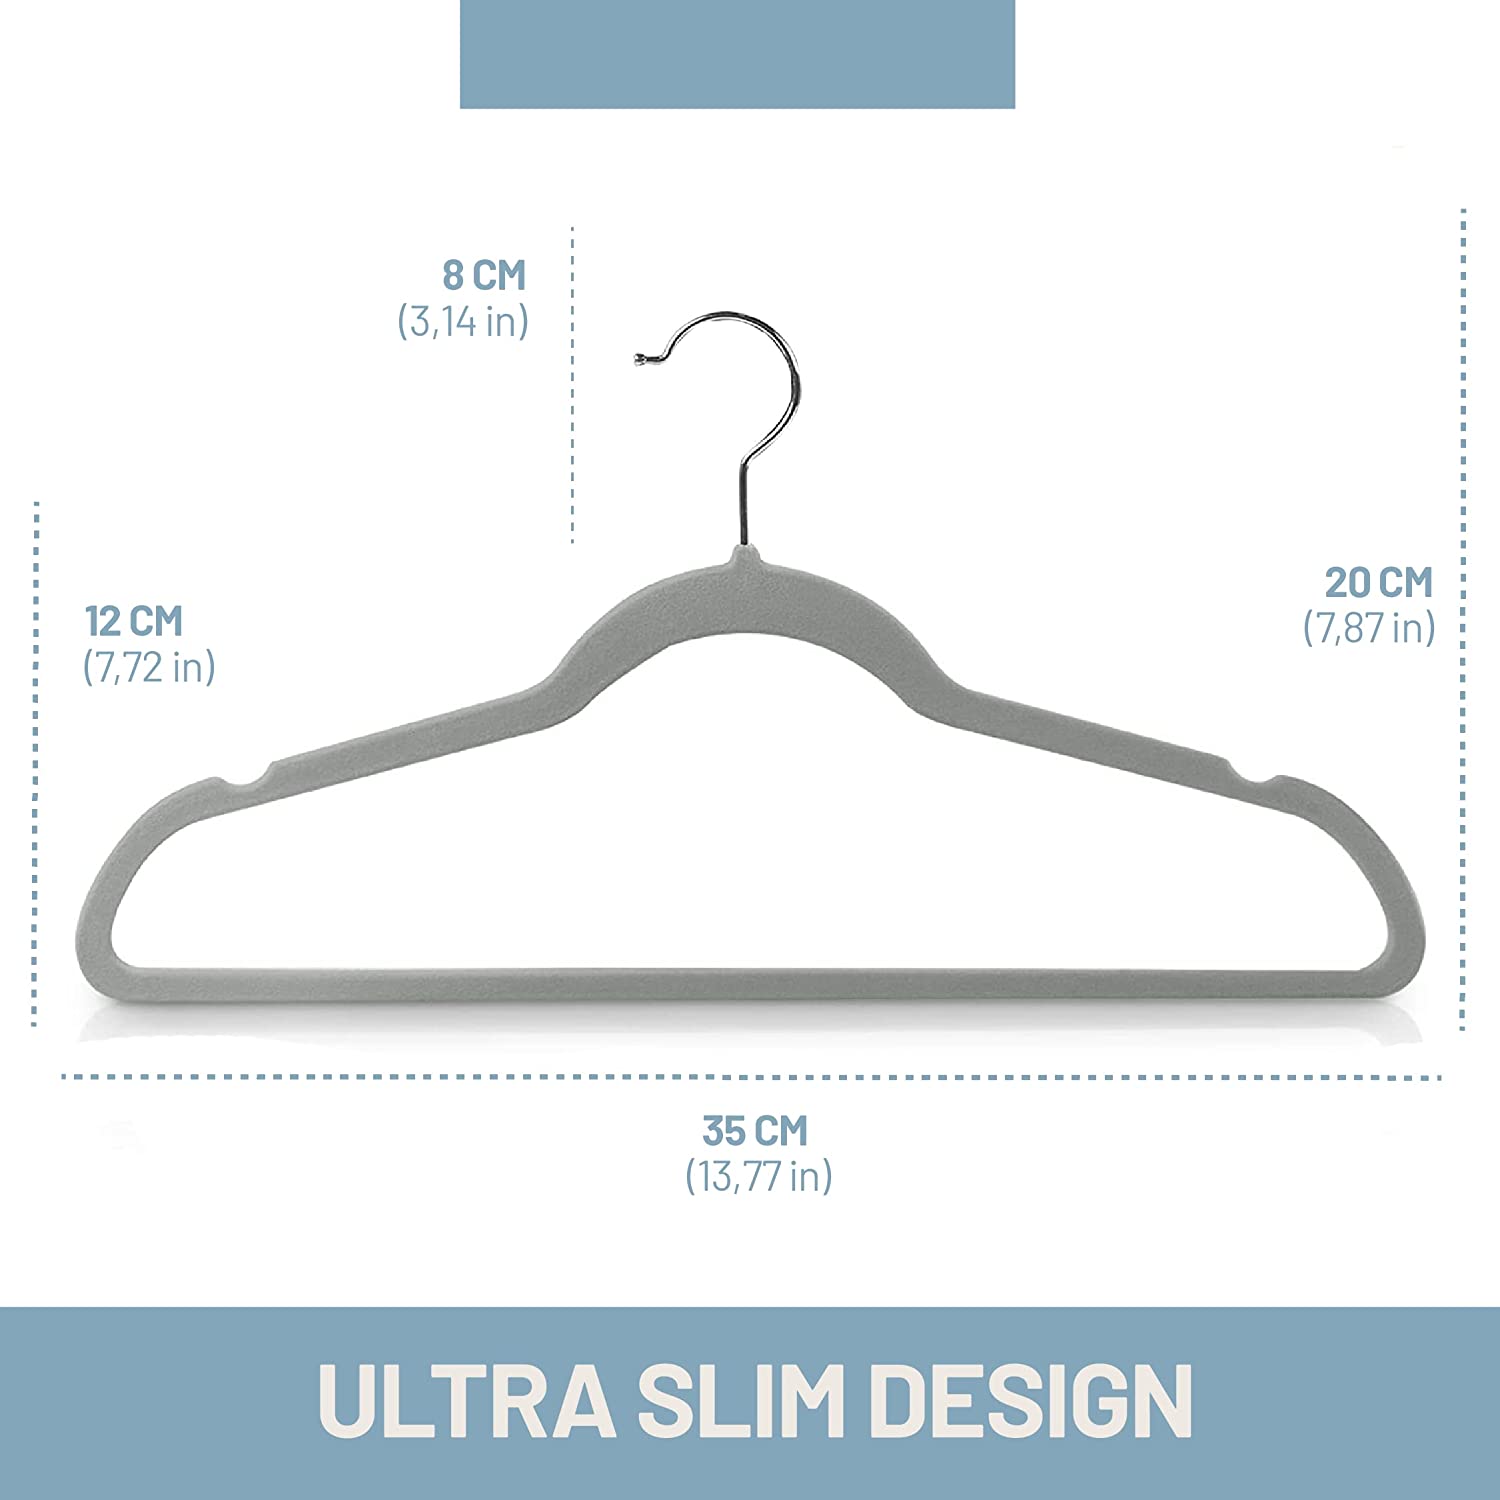 Clothes Baby Hangers for Closets - Unique Notches for Non Slip. Heavy-Duty Velvet Kids & Toddler Hangers for Closet | Ultra Thin Design for Space